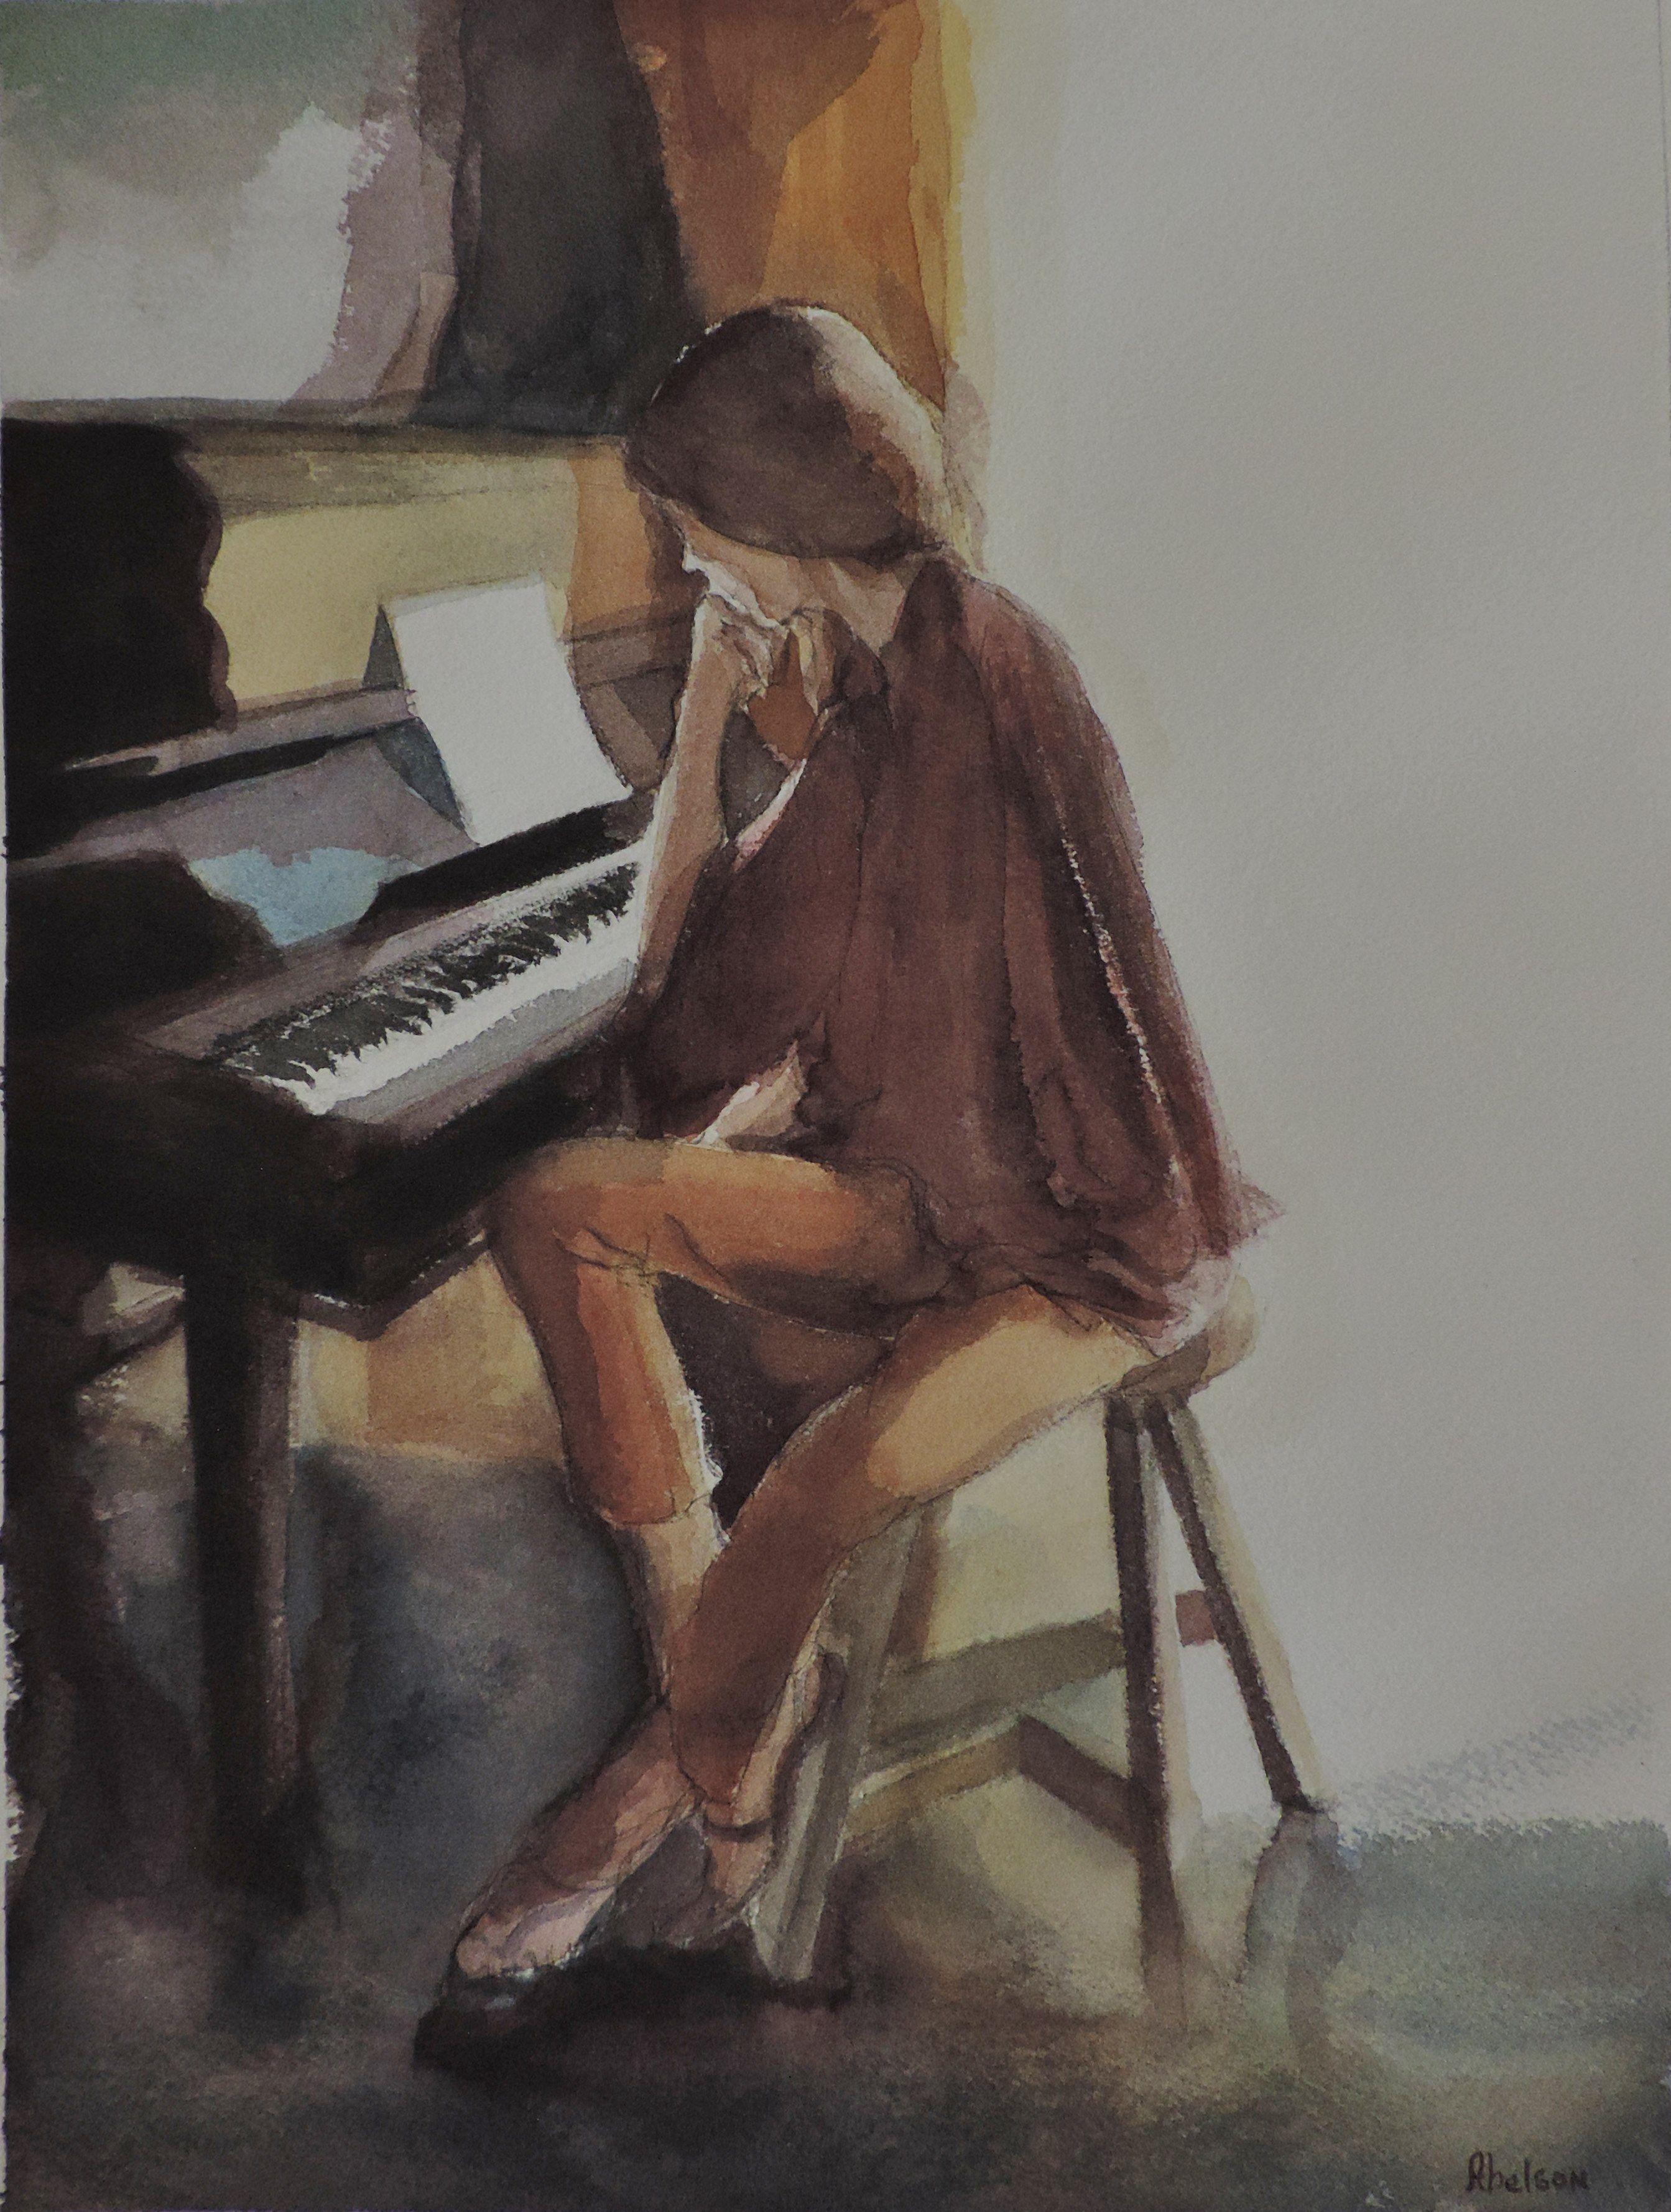 JUNE PIANO, Painting, Watercolor on Watercolor Paper - Art by David Abelson